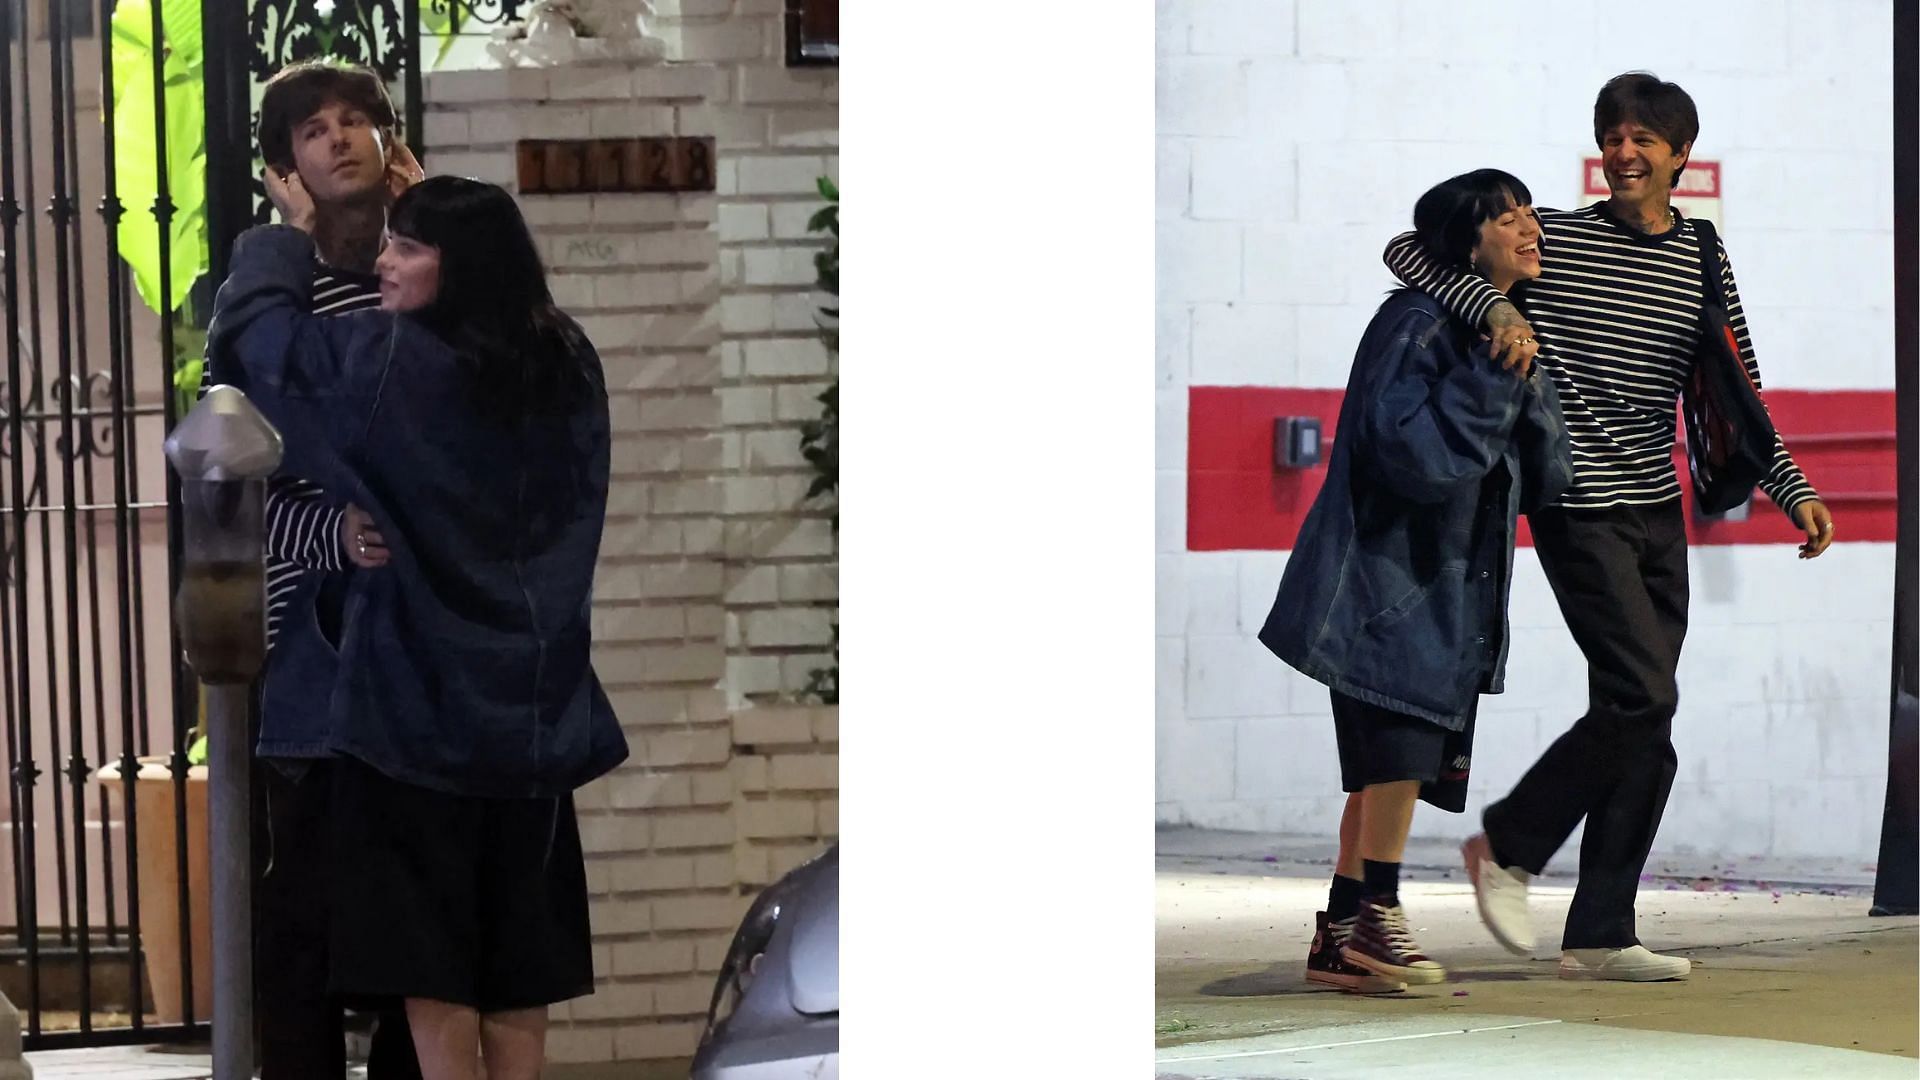 Jesse and Billie caught outside an Indian restaurant in Studio City (image via Backgrid)